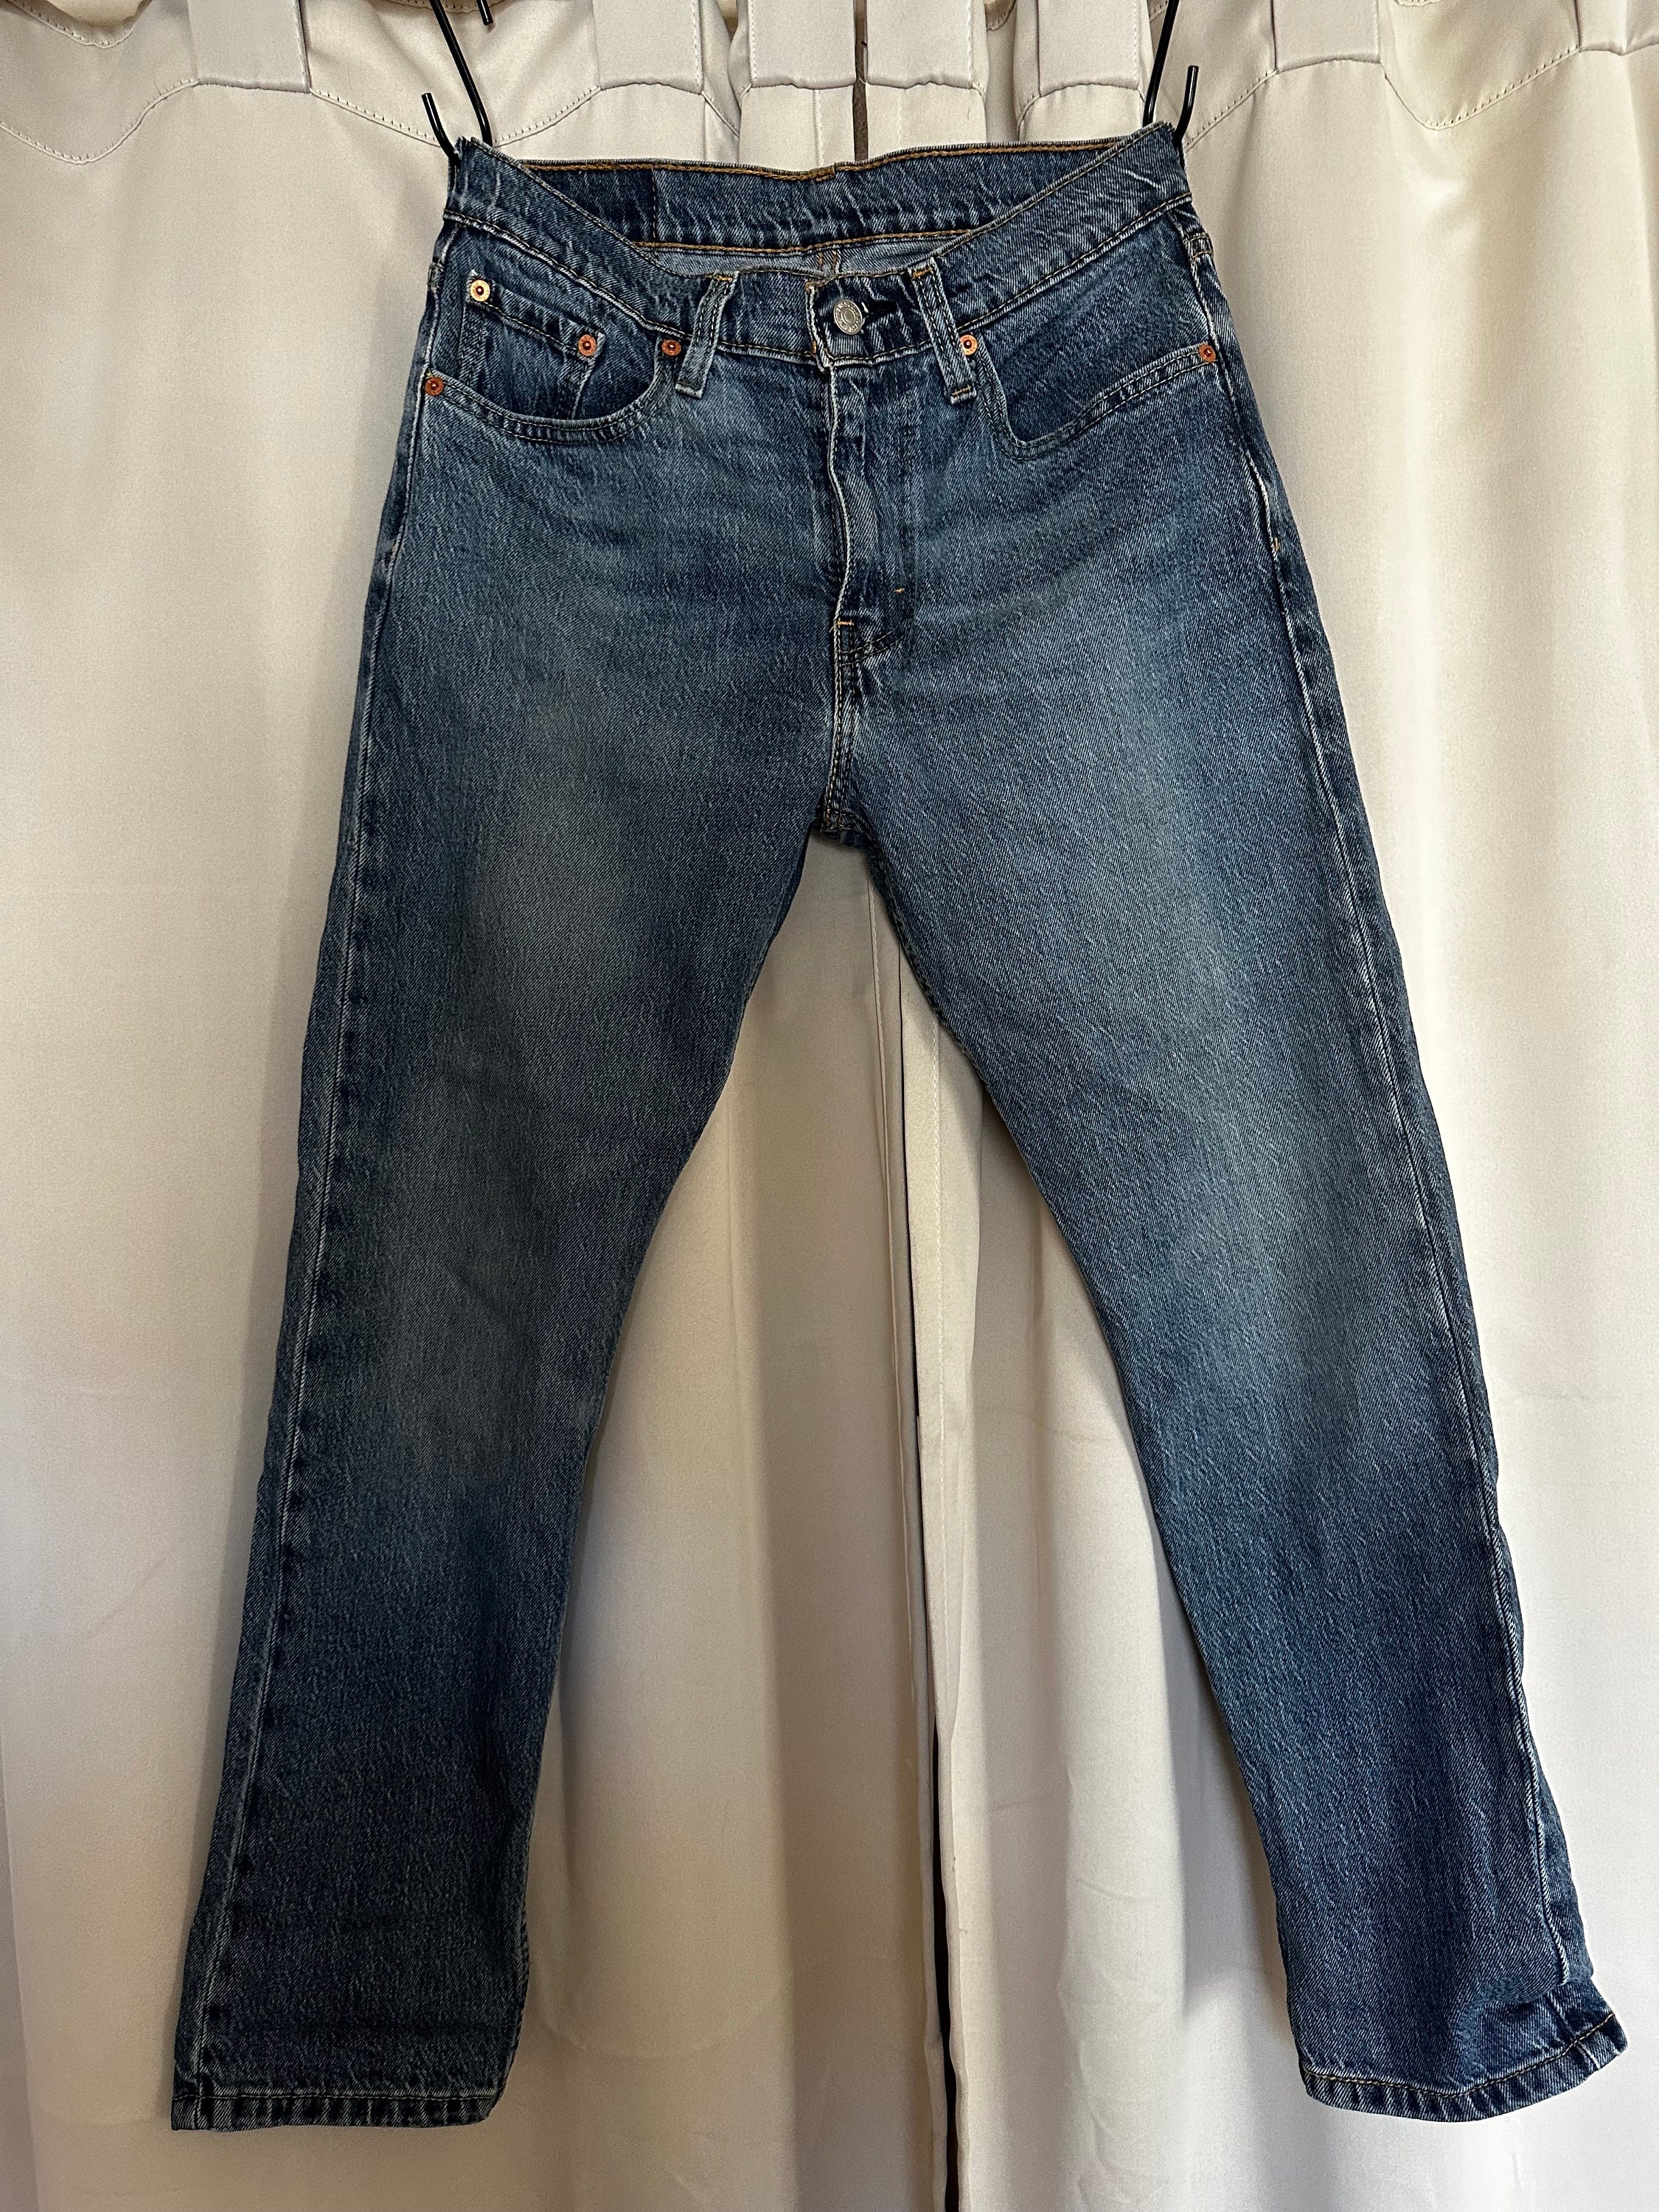 Hands On, Levi's Vintage Clothing